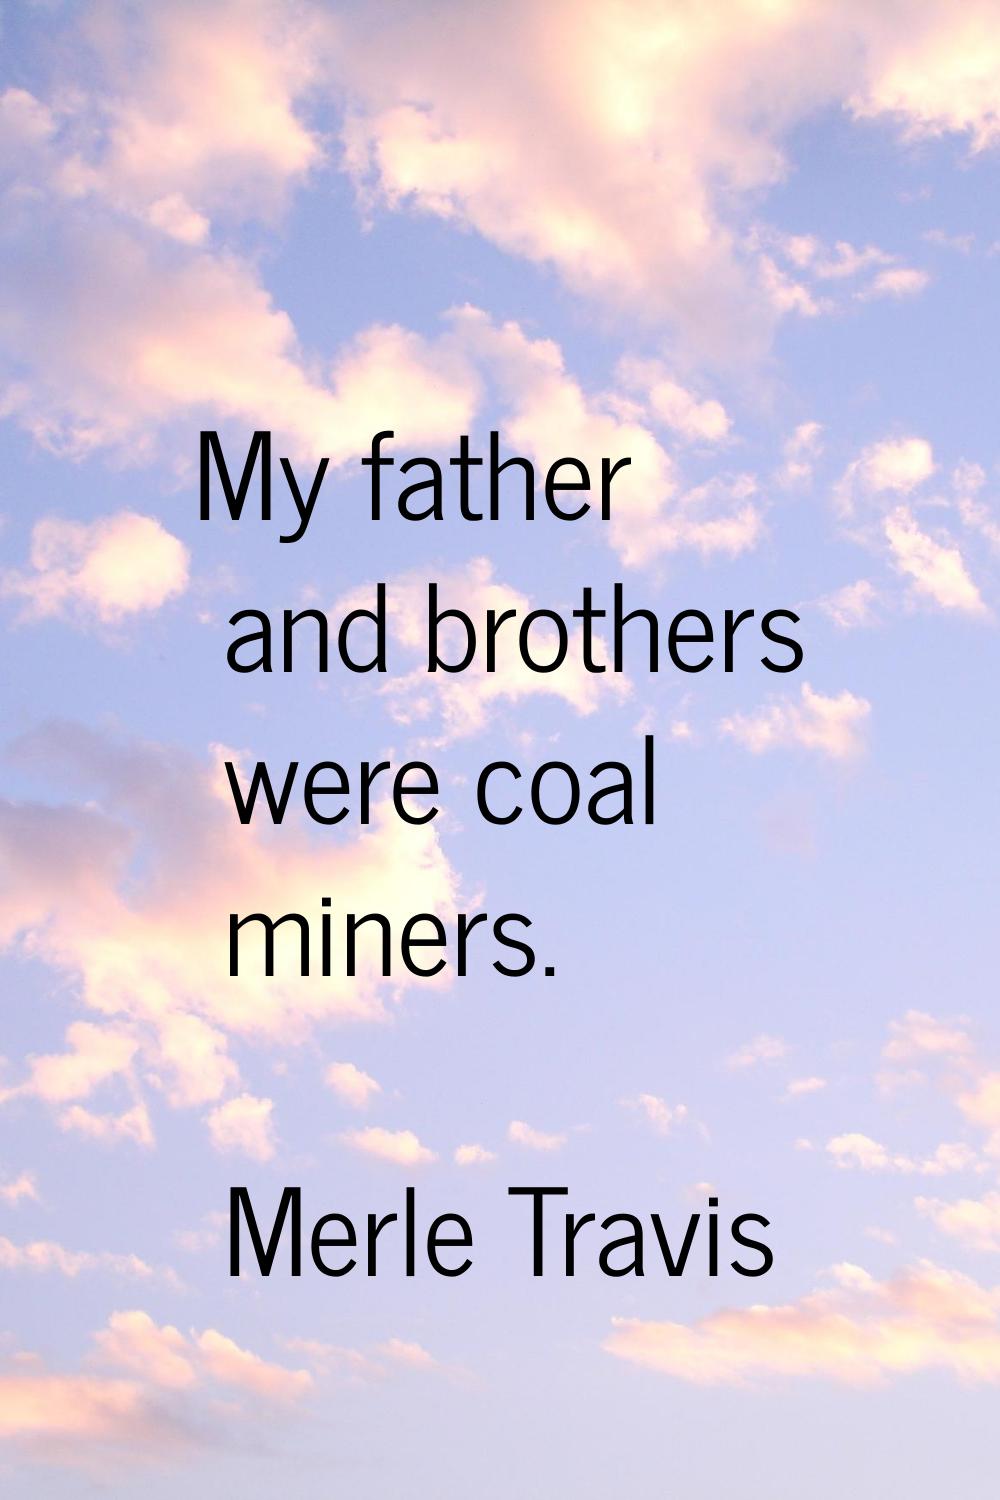 My father and brothers were coal miners.